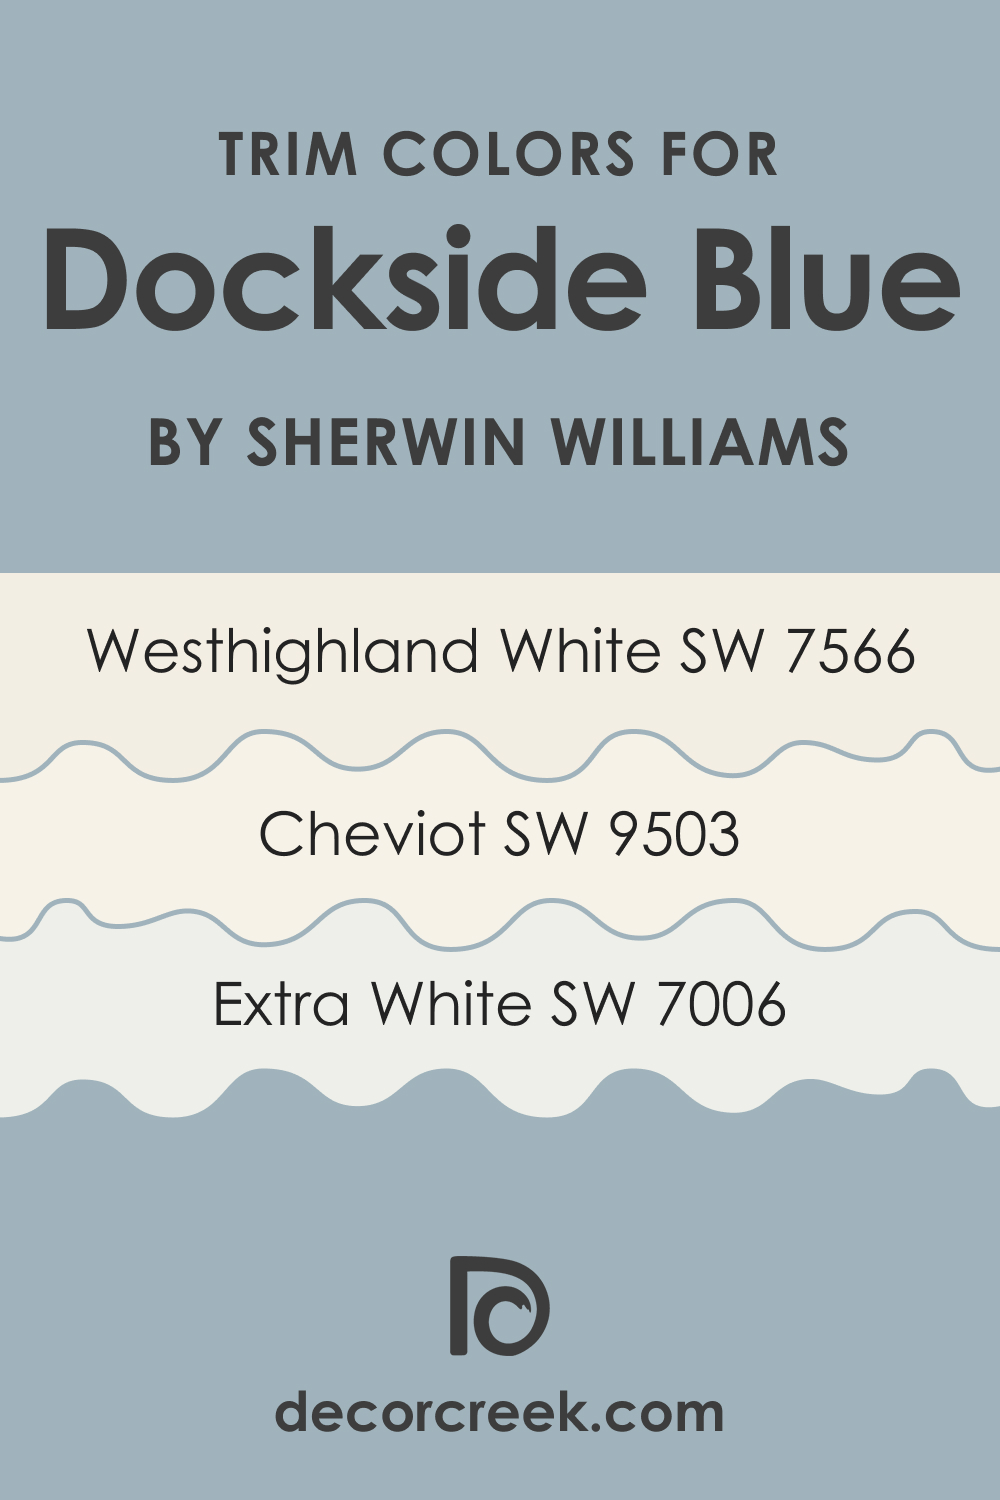 What Is the Best Trim Color For Dockside Blue SW 7601?